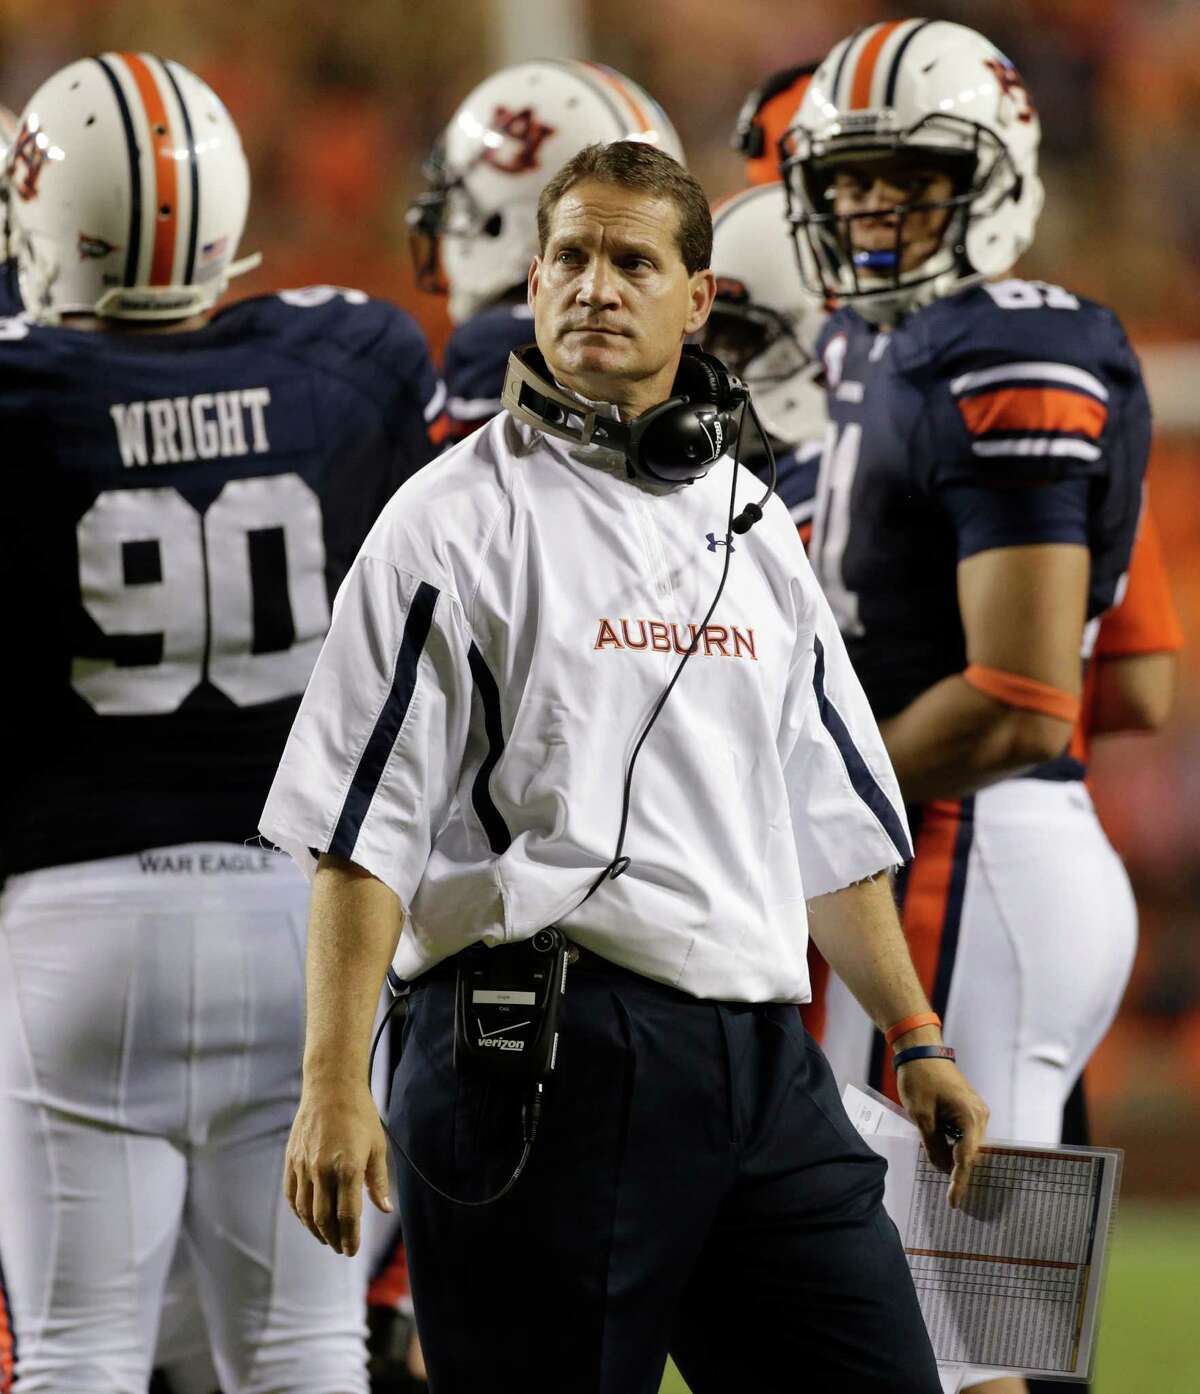 Two years removed from a national championship, Auburn and coach Gene Chizik are reeling. The Tigers are 1-6 overall and 0-5 in the SEC.